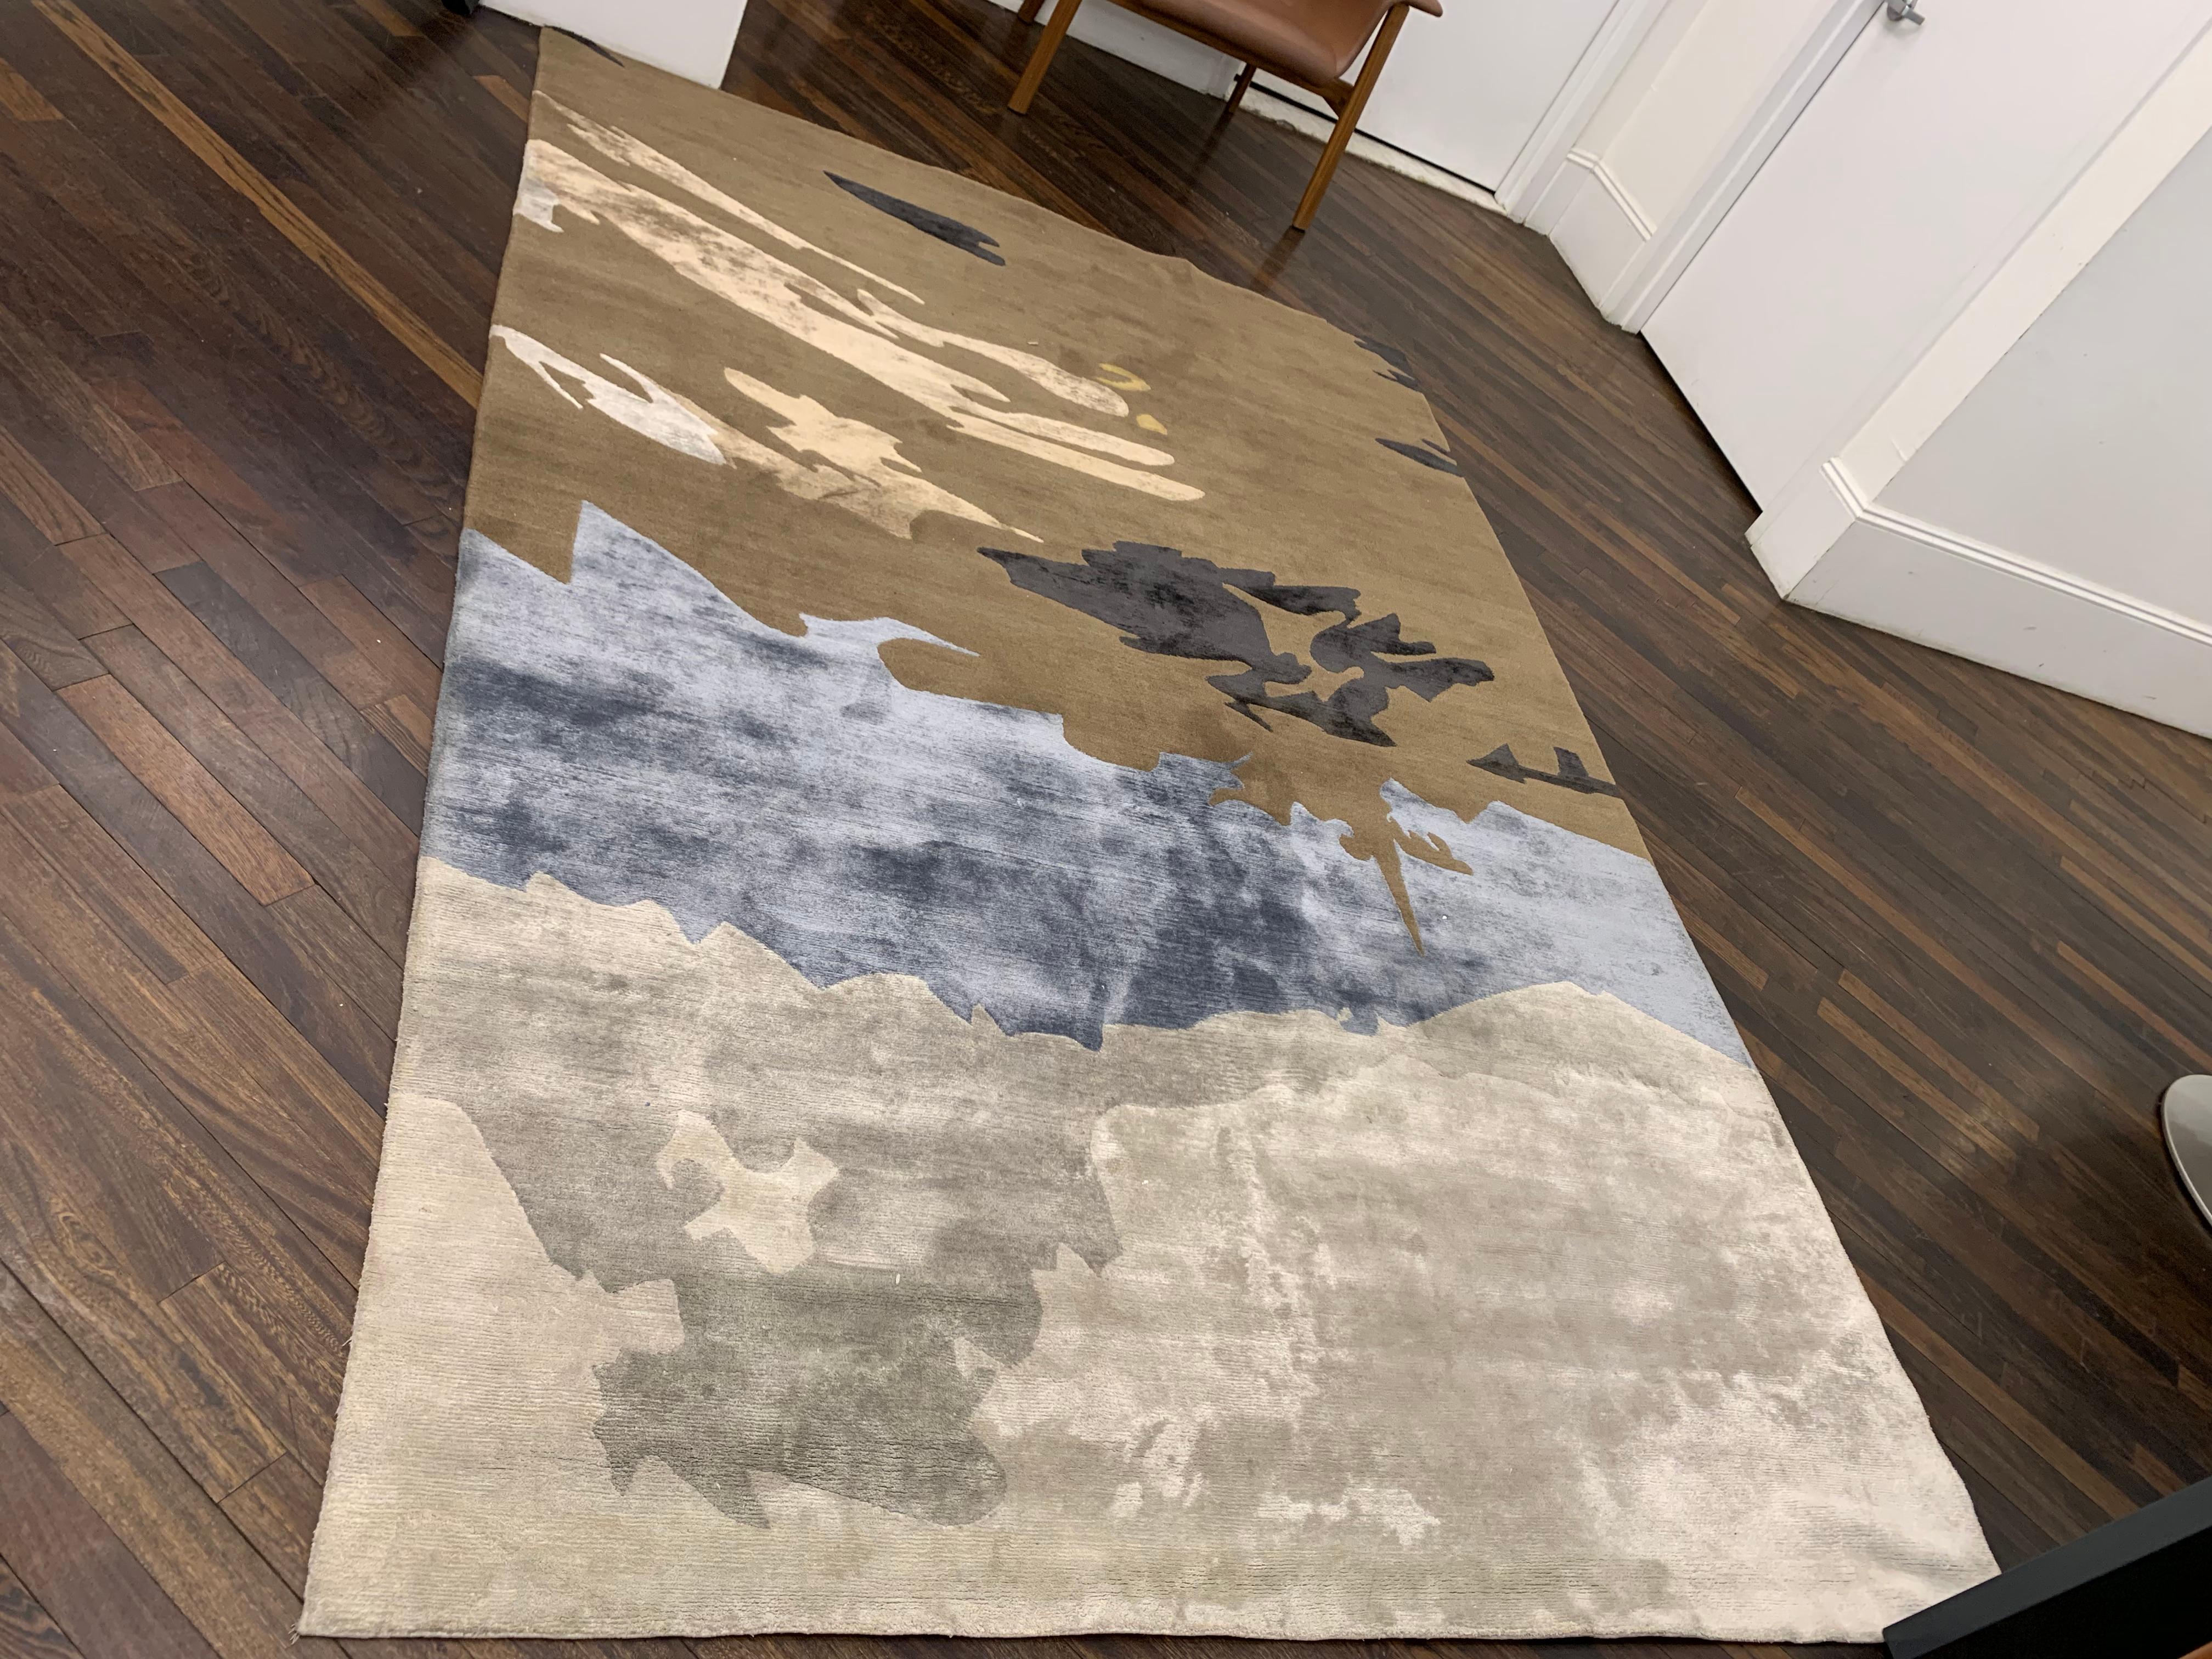 Pedro Lima Hillside rug
Knot count: 100 Knots PSI
Fiber comp: Wool and bamboo silk
Pile height: 6mm
Size: 6' x 9' (54 square feet).